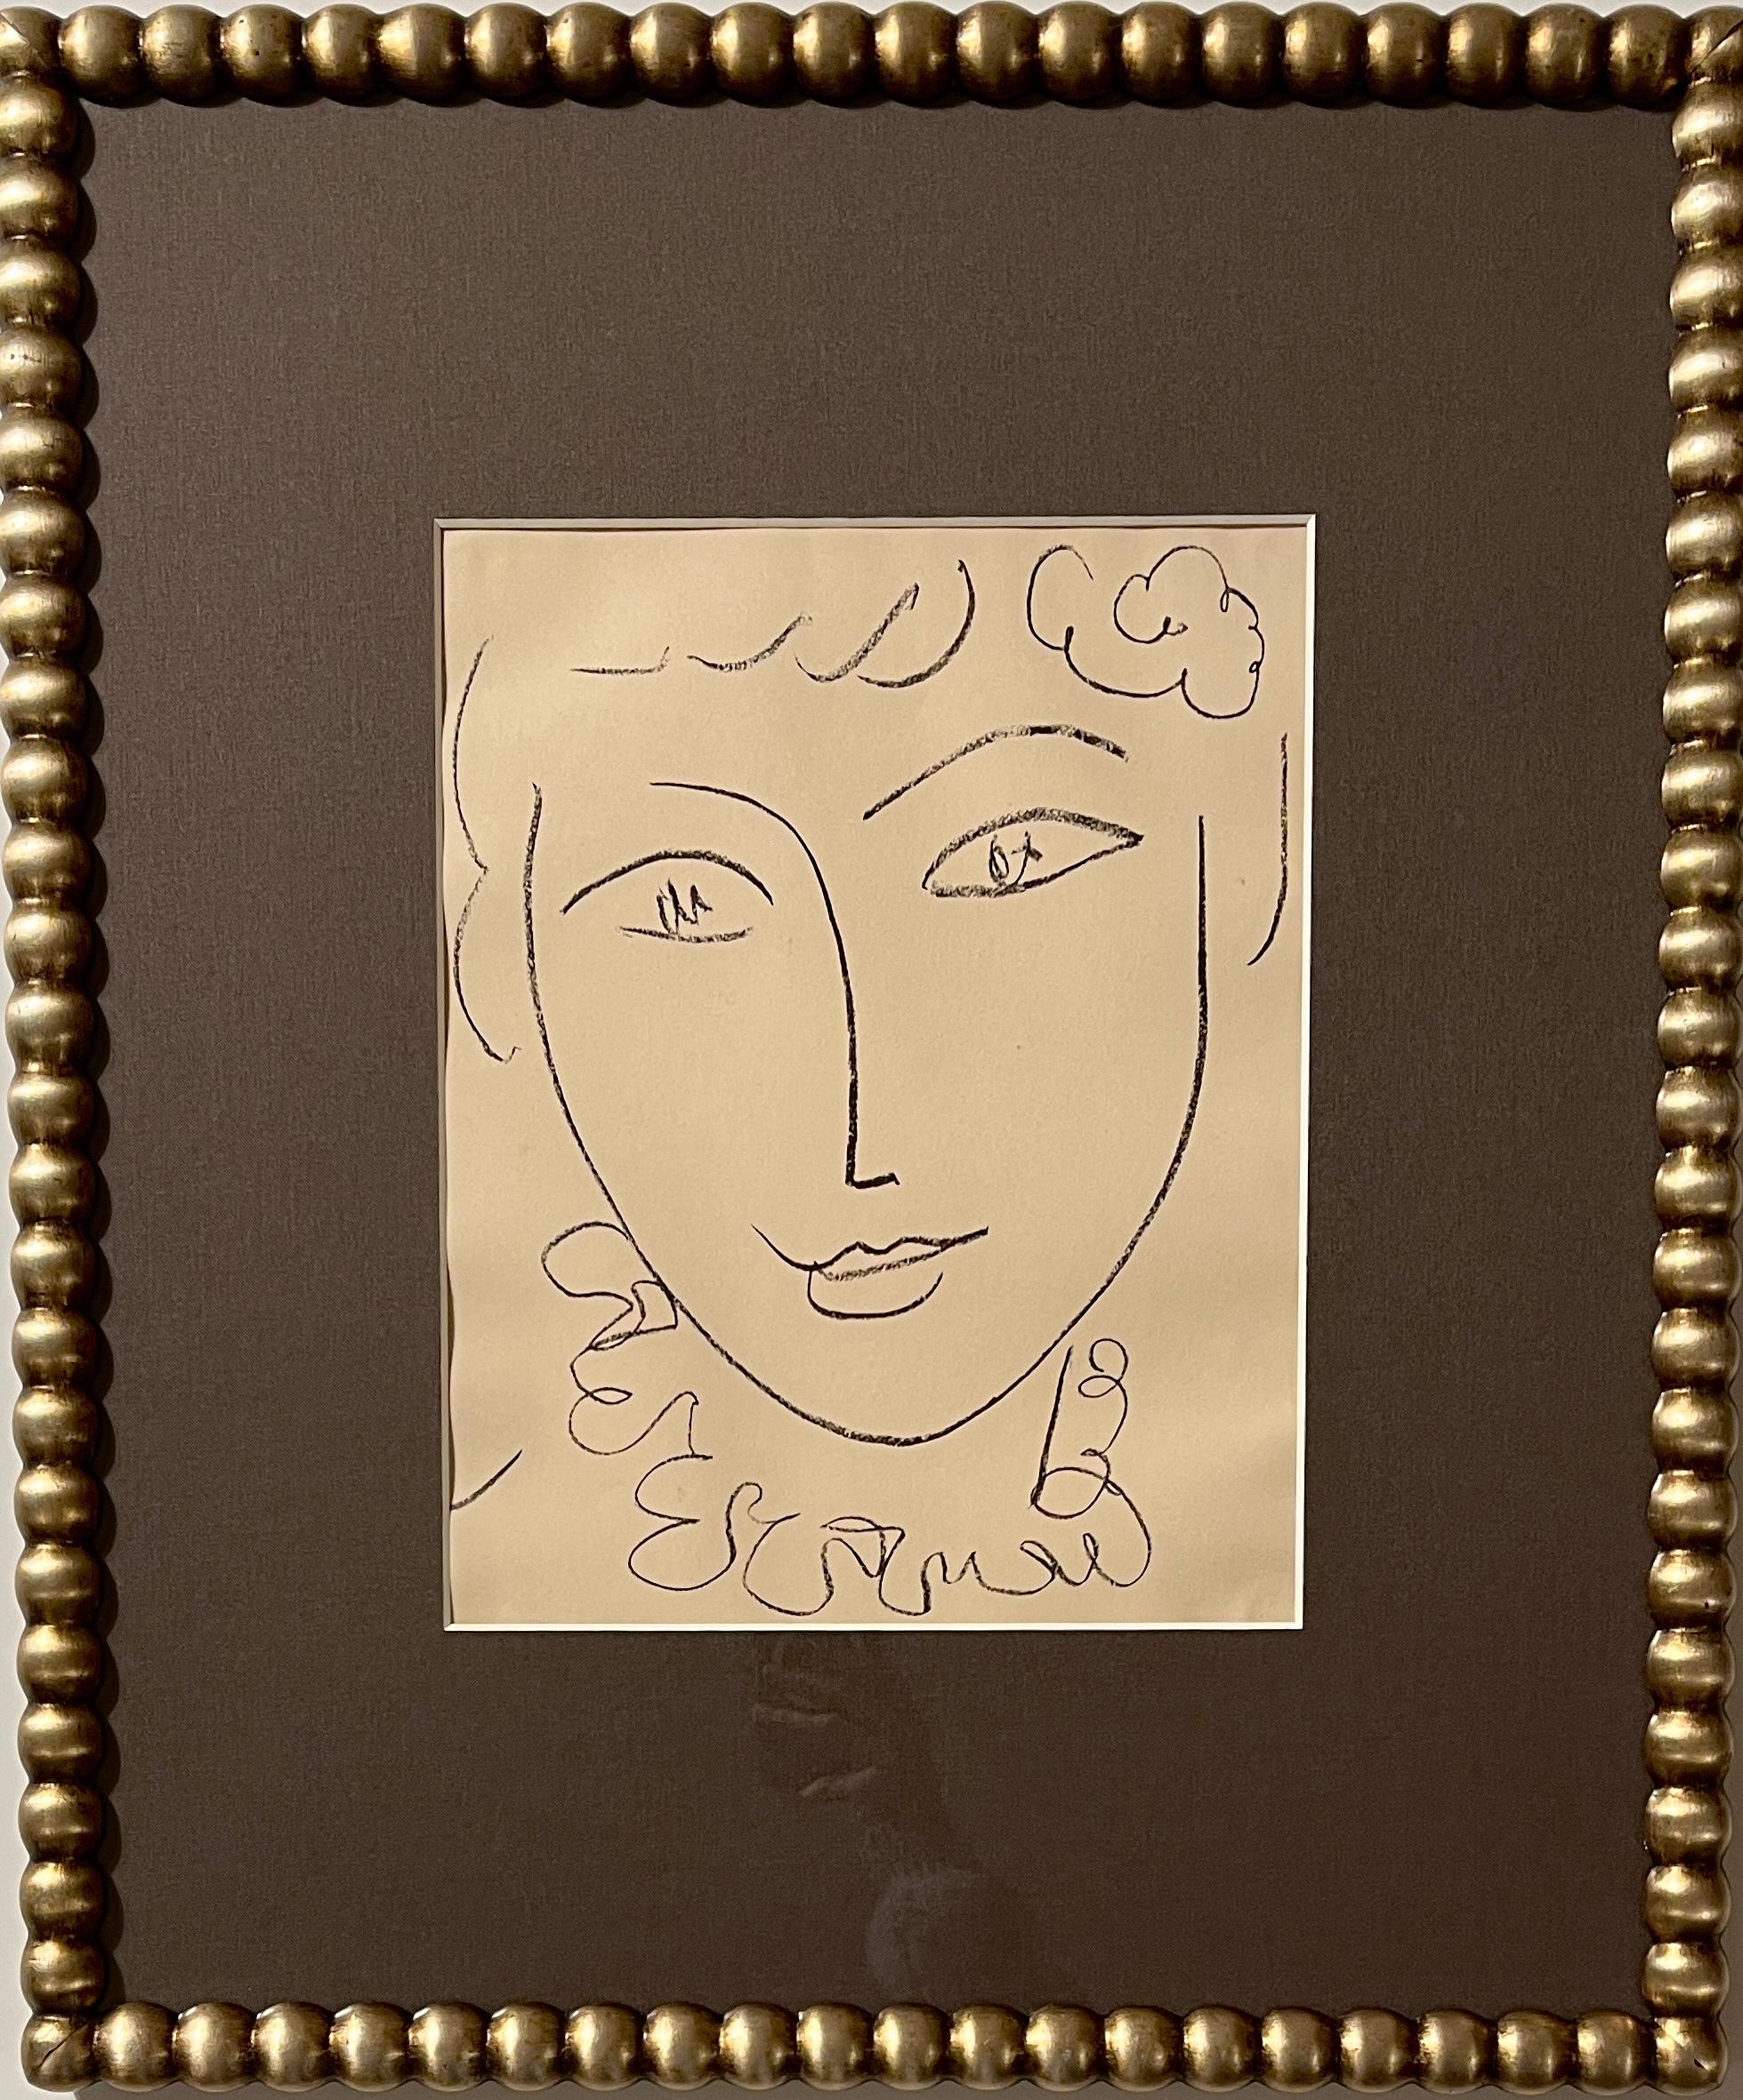 Jack Hooper
"Woman with Ruffle"
c.1950s
Conte crayon on paper
9.5"x12" site 19"x22.5 pewter decorative frame with linen mat
Unsigned

Very Good Condition - Minor wear consistent with age and history

Jack Meredith Hooper (August 26, 1928 - January